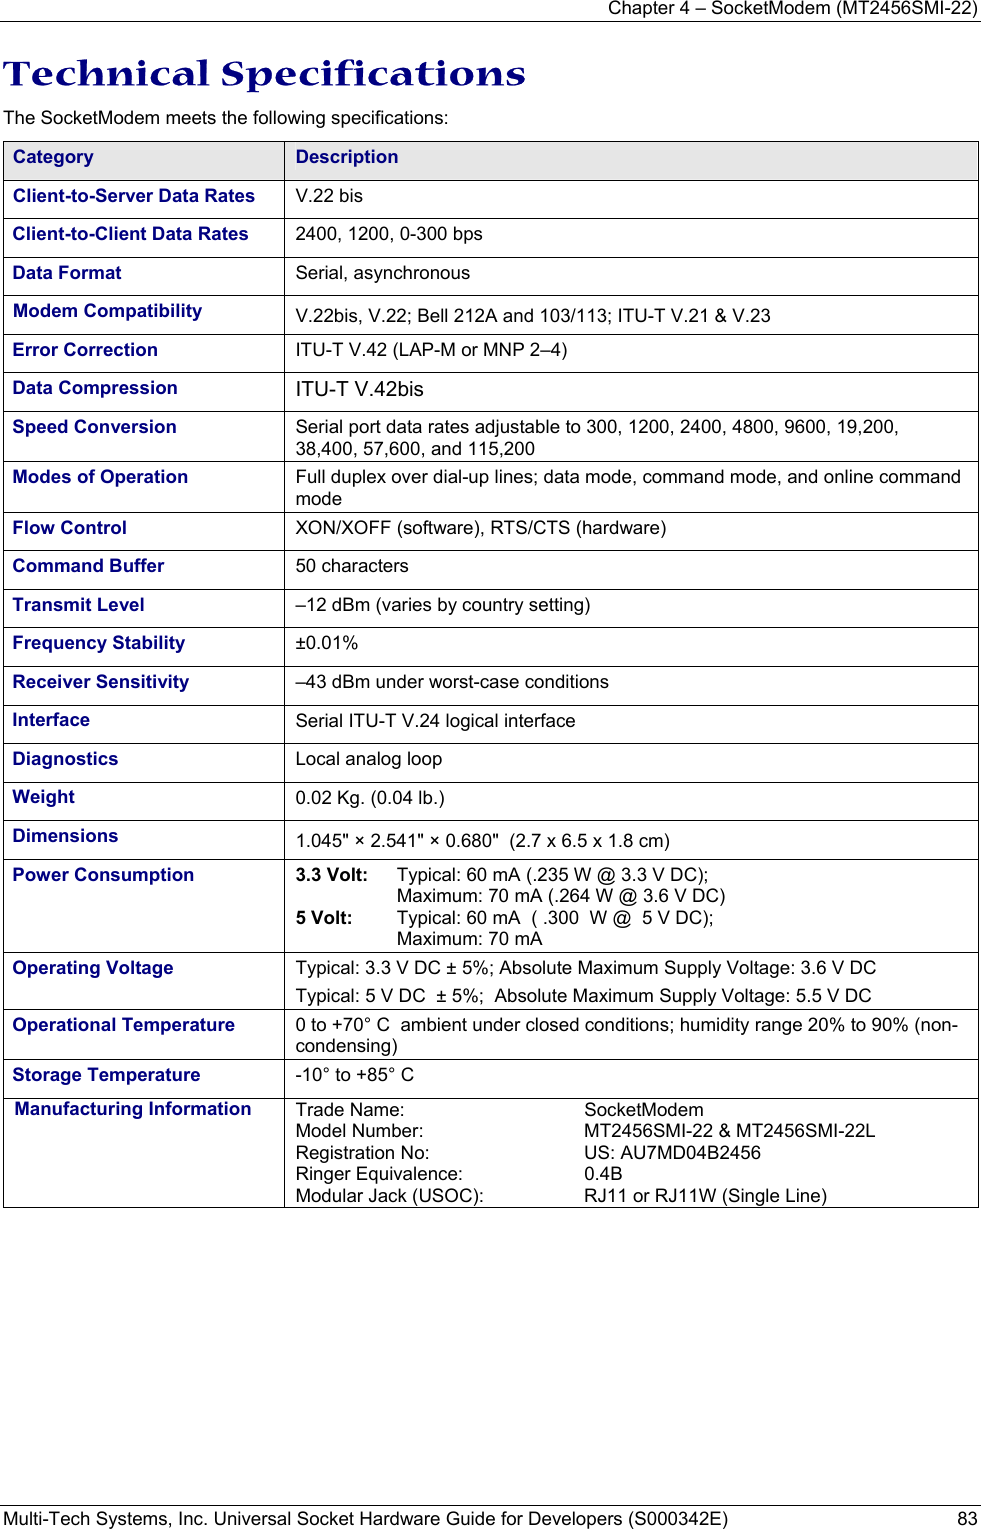 Chapter 4 – SocketModem (MT2456SMI-22) Multi-Tech Systems, Inc. Universal Socket Hardware Guide for Developers (S000342E)  83  Technical Specifications The SocketModem meets the following specifications:  Category  Description Client-to-Server Data Rates  V.22 bis Client-to-Client Data Rates  2400, 1200, 0-300 bps Data Format  Serial, asynchronous Modem Compatibility  V.22bis, V.22; Bell 212A and 103/113; ITU-T V.21 &amp; V.23  Error Correction  ITU-T V.42 (LAP-M or MNP 2–4) Data Compression  ITU-T V.42bis  Speed Conversion   Serial port data rates adjustable to 300, 1200, 2400, 4800, 9600, 19,200, 38,400, 57,600, and 115,200 Modes of Operation  Full duplex over dial-up lines; data mode, command mode, and online command mode Flow Control  XON/XOFF (software), RTS/CTS (hardware) Command Buffer  50 characters Transmit Level  –12 dBm (varies by country setting) Frequency Stability  ±0.01% Receiver Sensitivity  –43 dBm under worst-case conditions Interface  Serial ITU-T V.24 logical interface Diagnostics  Local analog loop Weight  0.02 Kg. (0.04 lb.) Dimensions  1.045&quot; × 2.541&quot; × 0.680&quot;  (2.7 x 6.5 x 1.8 cm) Power Consumption   3.3 Volt:   Typical: 60 mA (.235 W @ 3.3 V DC);   Maximum: 70 mA (.264 W @ 3.6 V DC) 5 Volt:  Typical: 60 mA  ( .300  W @  5 V DC);   Maximum: 70 mA Operating Voltage  Typical: 3.3 V DC ± 5%; Absolute Maximum Supply Voltage: 3.6 V DC Typical: 5 V DC  ± 5%;  Absolute Maximum Supply Voltage: 5.5 V DC Operational Temperature   0 to +70° C  ambient under closed conditions; humidity range 20% to 90% (non-condensing) Storage Temperature  -10° to +85° C Manufacturing Information  Trade Name:  SocketModem  Model Number:  MT2456SMI-22 &amp; MT2456SMI-22L Registration No:  US: AU7MD04B2456 Ringer Equivalence:  0.4B Modular Jack (USOC):  RJ11 or RJ11W (Single Line) 